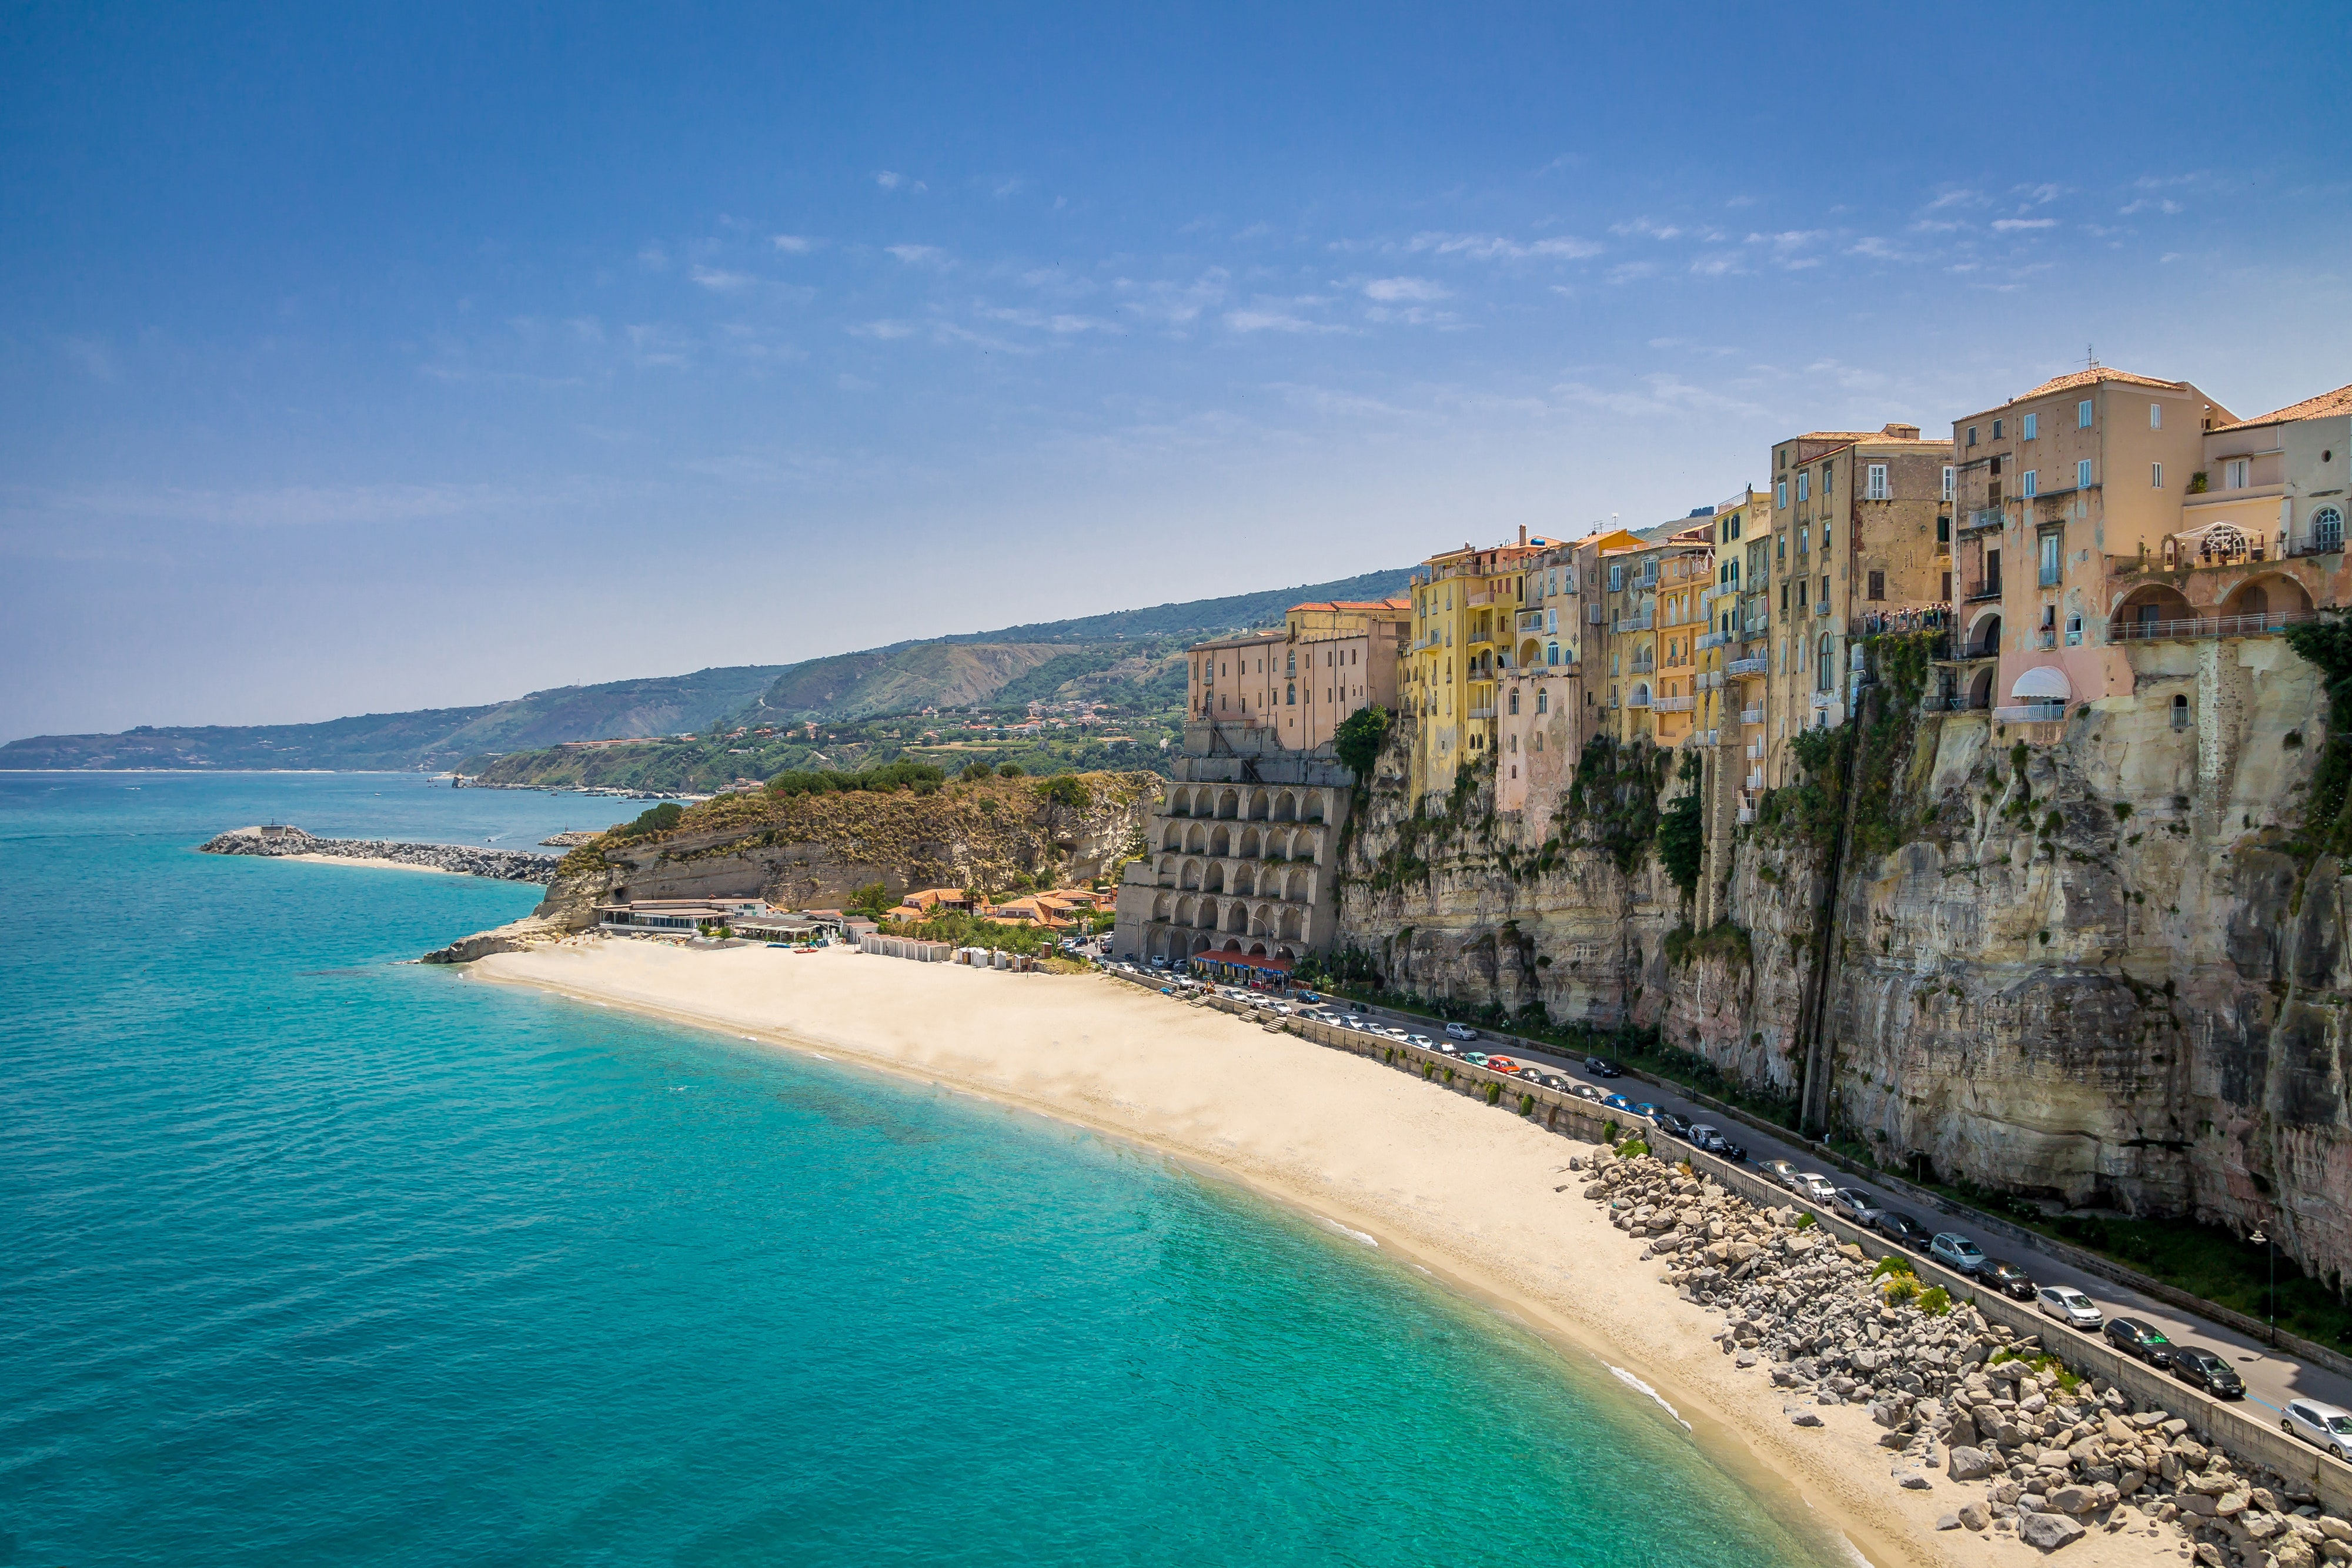 <p>Visit the physical “toe” of Italy’s boot and you’ll find so many delightful seaside landscapes it might even get boring. The antidote to such ennui might be the jewel of <a href="https://www.cntraveler.com/stories/2015-03-29/rise-of-calabria-rediscovering-the-south-of-italy?mbid=synd_msn_rss&utm_source=msn&utm_medium=syndication">Calabria</a>, Marasusa Beach. Located in the town of Tropea, it’s a place so awe-inspiring that it was christened <em>la costa degli dei</em>, literally “the coast of the gods.” It’s easy to see why deities would approve: Marasusa is home to scenic cliffs, pristine white sand, and calmly clear waters.</p> <p>Those hungry for culinary experiences will find great food in the area: Calabria is best known for its chili peppers, and Tropea itself is renowned for its exceptionally sweet red onions (call them <em>le cipolle degli dei</em>). Get to Tropea by flying into Reggio Calabria and driving up, or by taking the high-speed train from <a href="https://www.cntraveler.com/story/how-to-spend-24-hours-in-naples-according-to-a-local?mbid=synd_msn_rss&utm_source=msn&utm_medium=syndication">Naples</a>. Book a table (and a room) at <a href="https://cna.st/affiliate-link/3qWb9ebJmvAykTPuCAMuQmJCtNYHeP2tSqKHGQsjySq9oFNgP2ZxWtPwMfQ1ybGrtwKzauNvpYj94uVD6gasVSpkFWLzkyvMh7NPzzxLvnsQSPHeC1GsKUuLqY7pZgkuPnHswgvJmR7se" rel="sponsored">Villa Paola</a>, the 12-room convent-turned-luxury hotel for a trip worthy of the gods themselves.</p><p>Sign up to receive the latest news, expert tips, and inspiration on all things travel</p><a href="https://www.cntraveler.com/newsletter/the-daily?sourceCode=msnsend">Inspire Me</a>